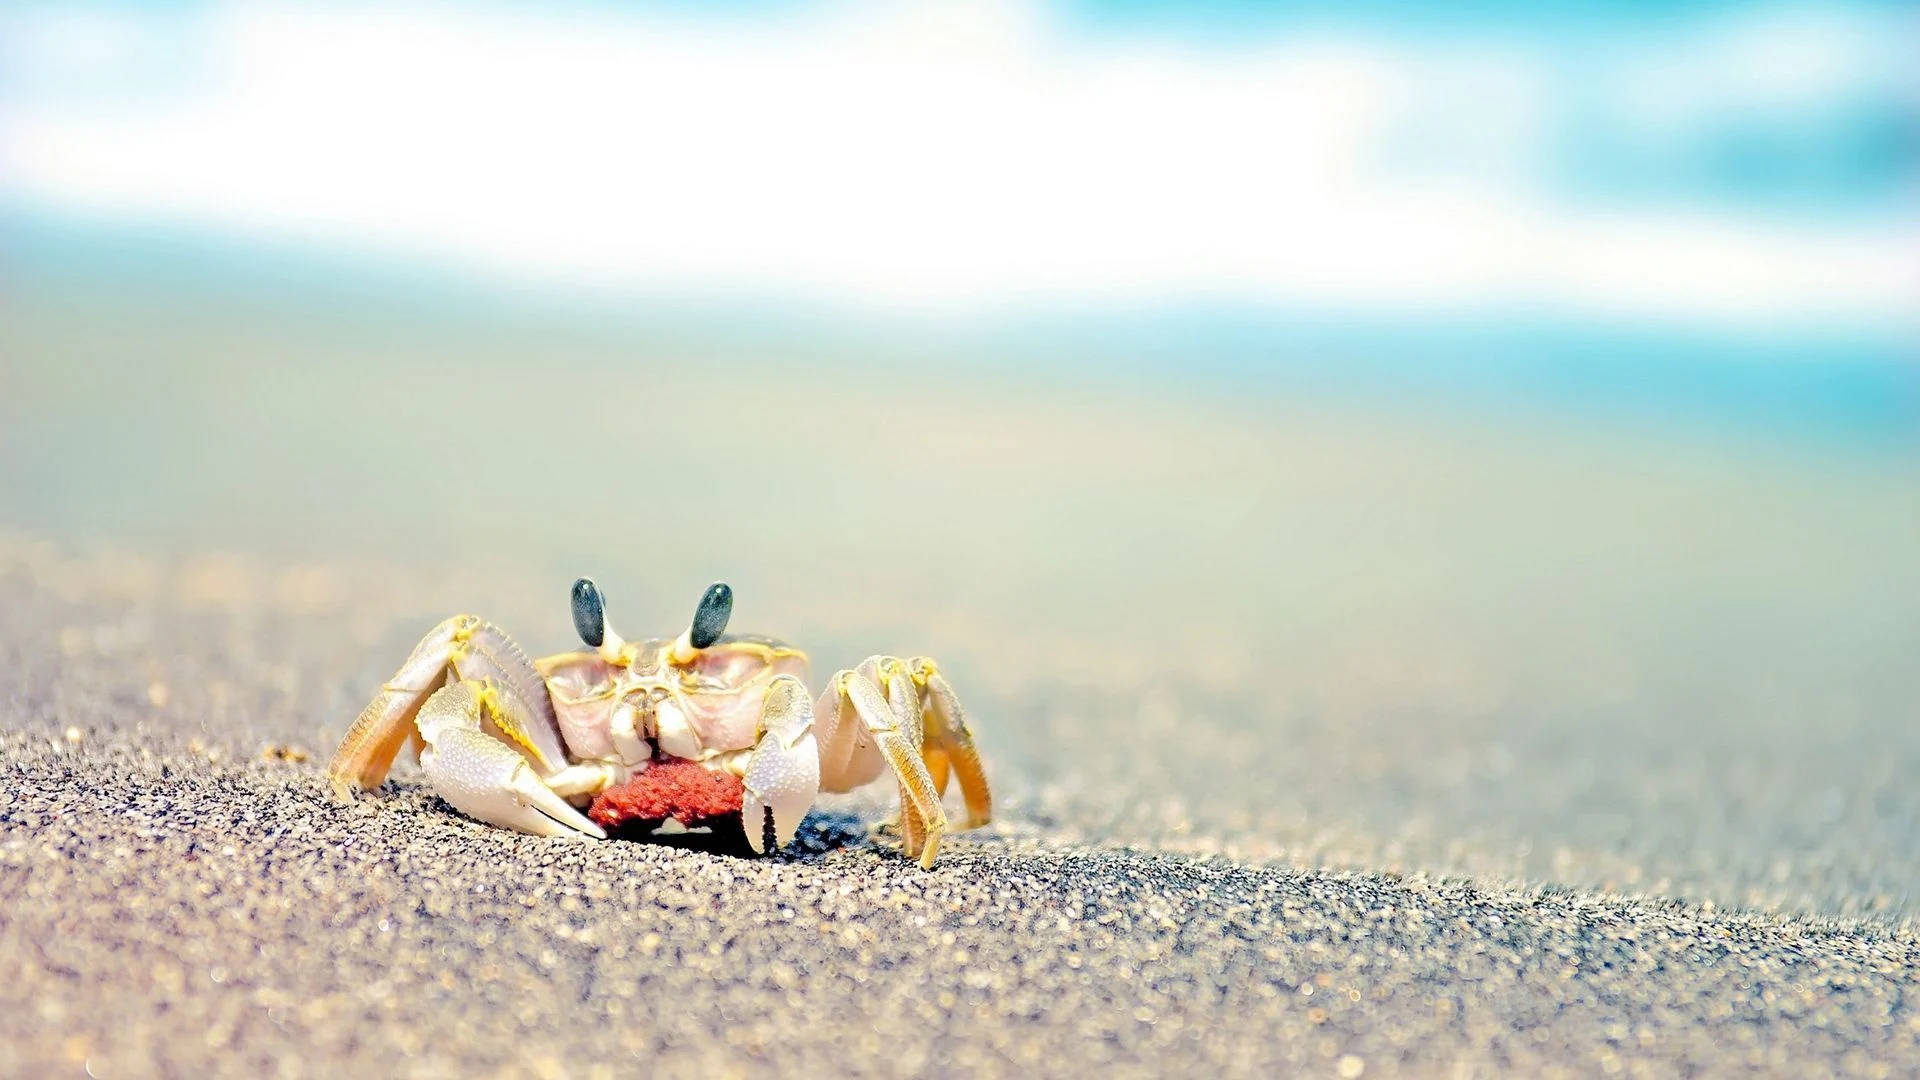 Small Crab In Beach Sand